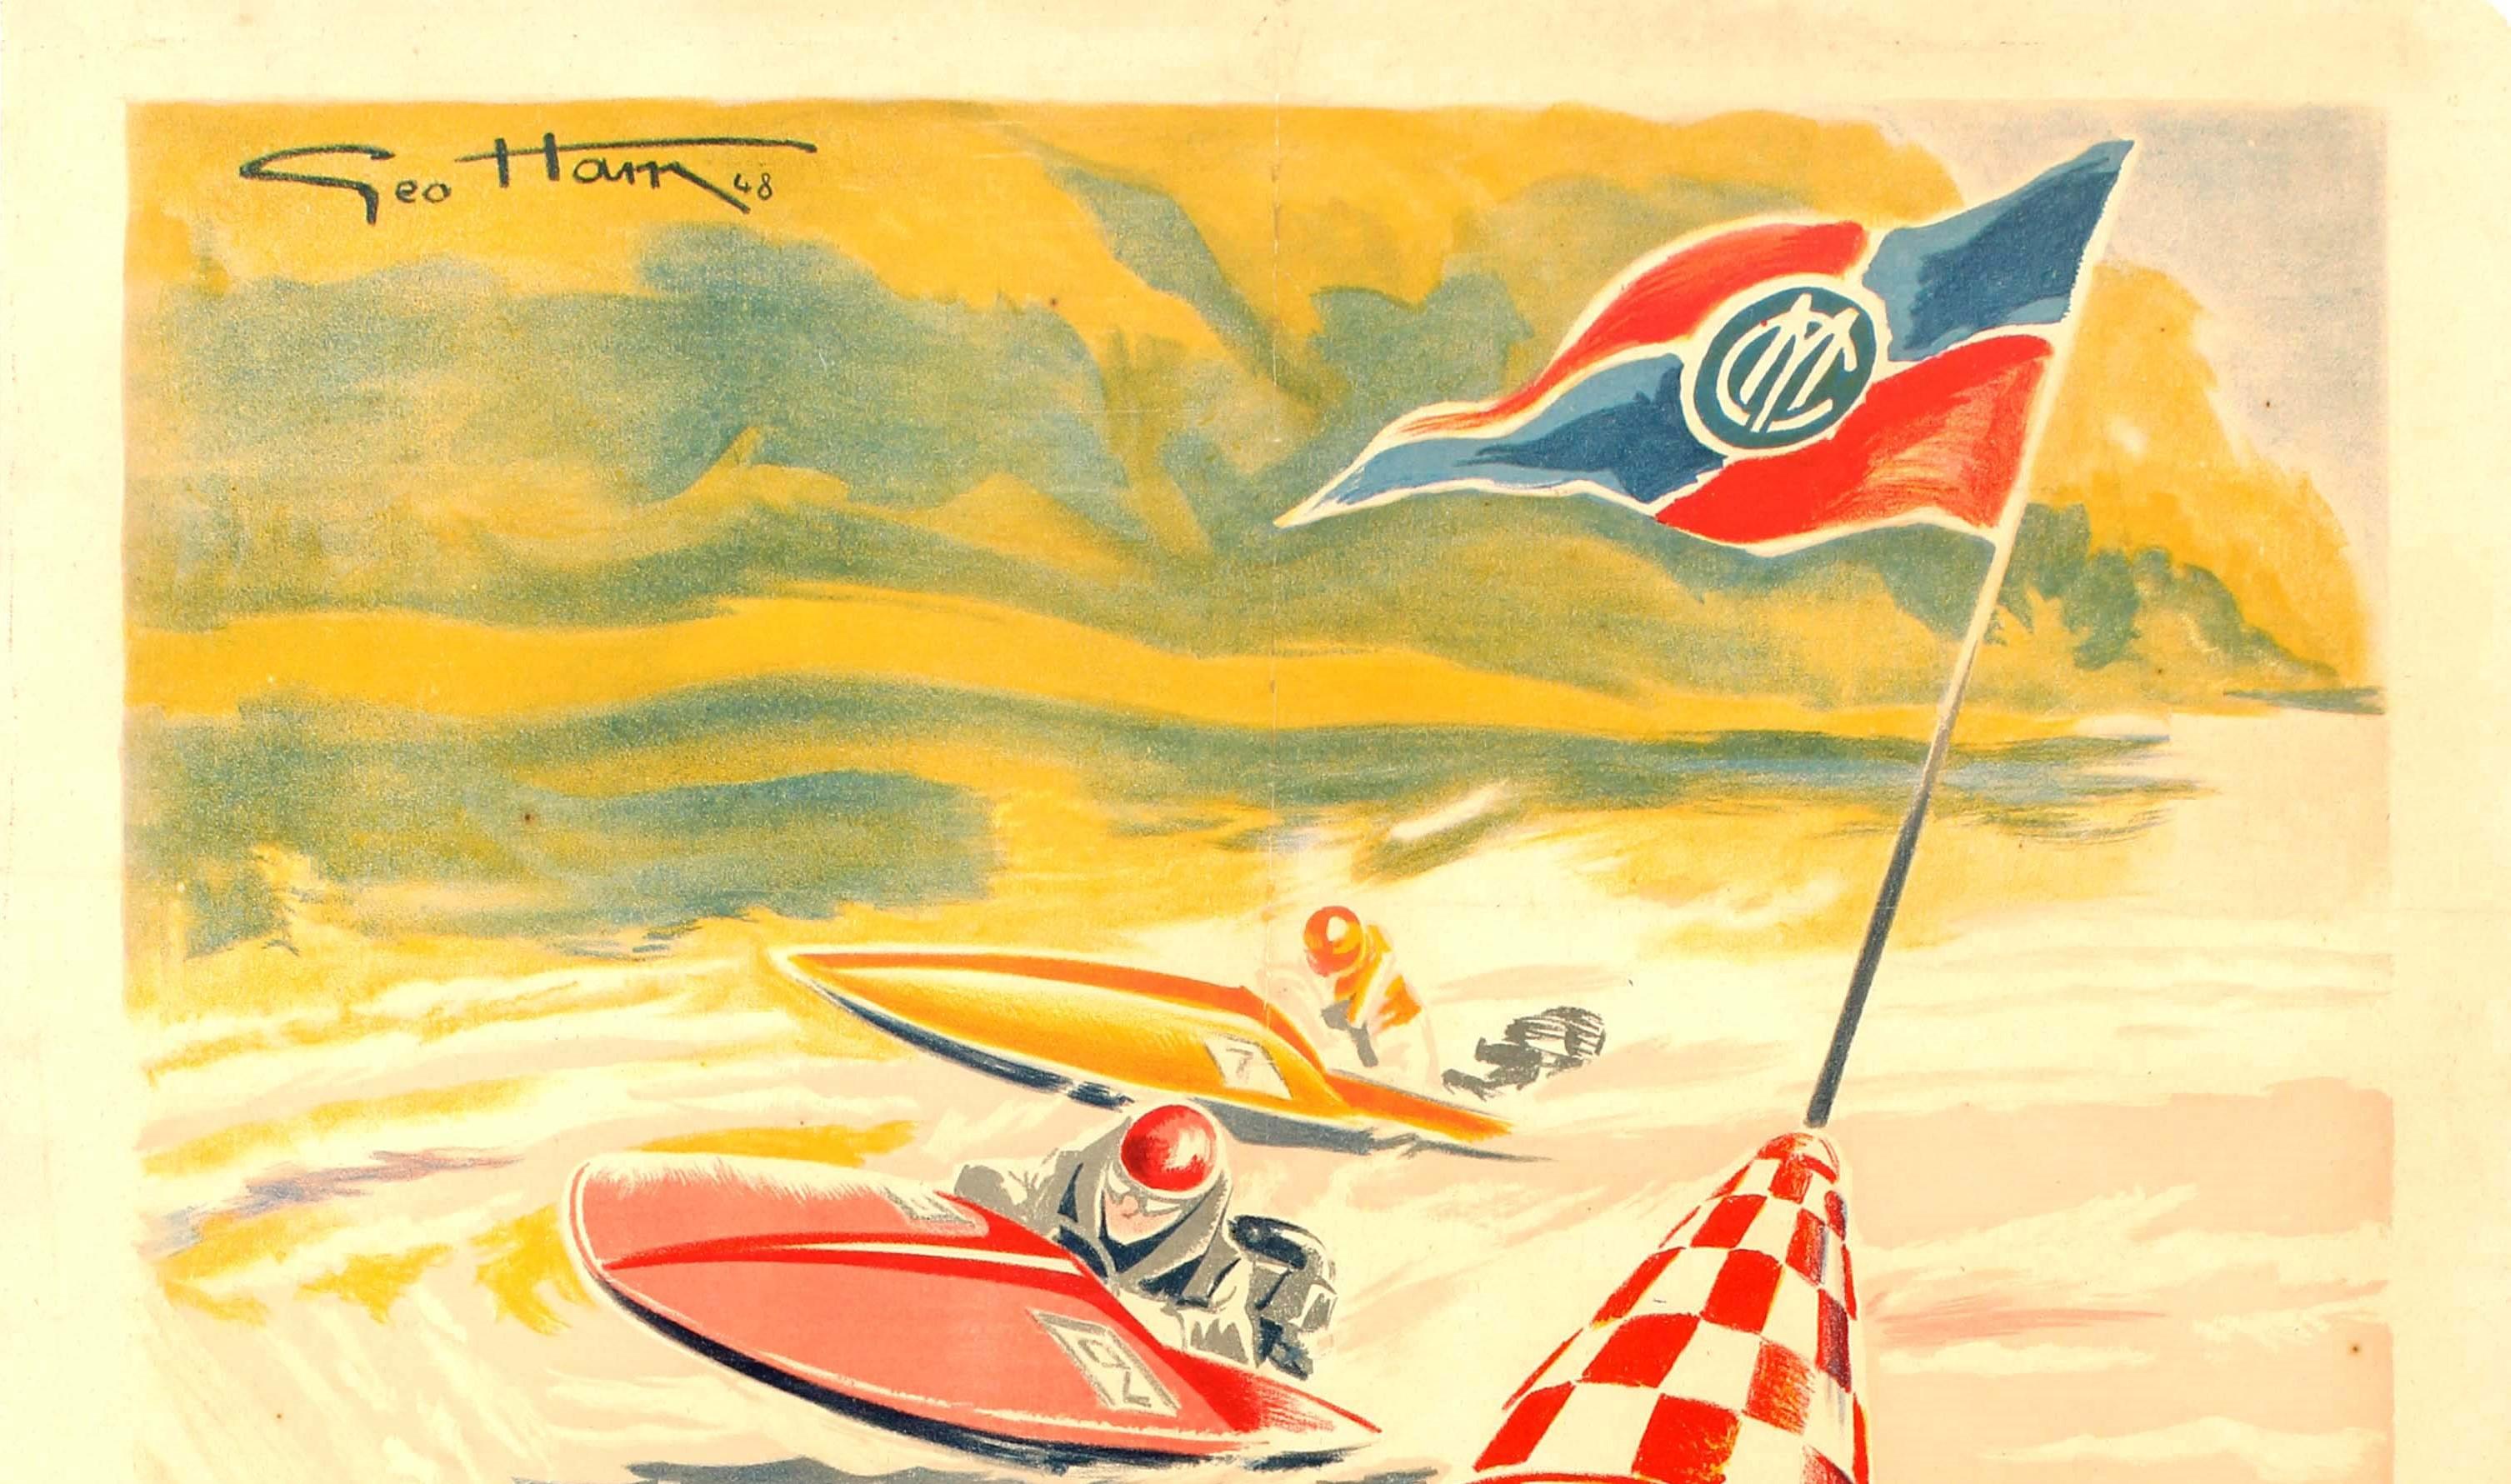 Original vintage water sport poster for the Grand Meeting International Motonautique held on 12 and 13 June 1948 at the Bassin Du Trocadero featuring a dynamic illustration by Geo Ham (Georges Hamel; 1900-1972) of speed boats racing around a